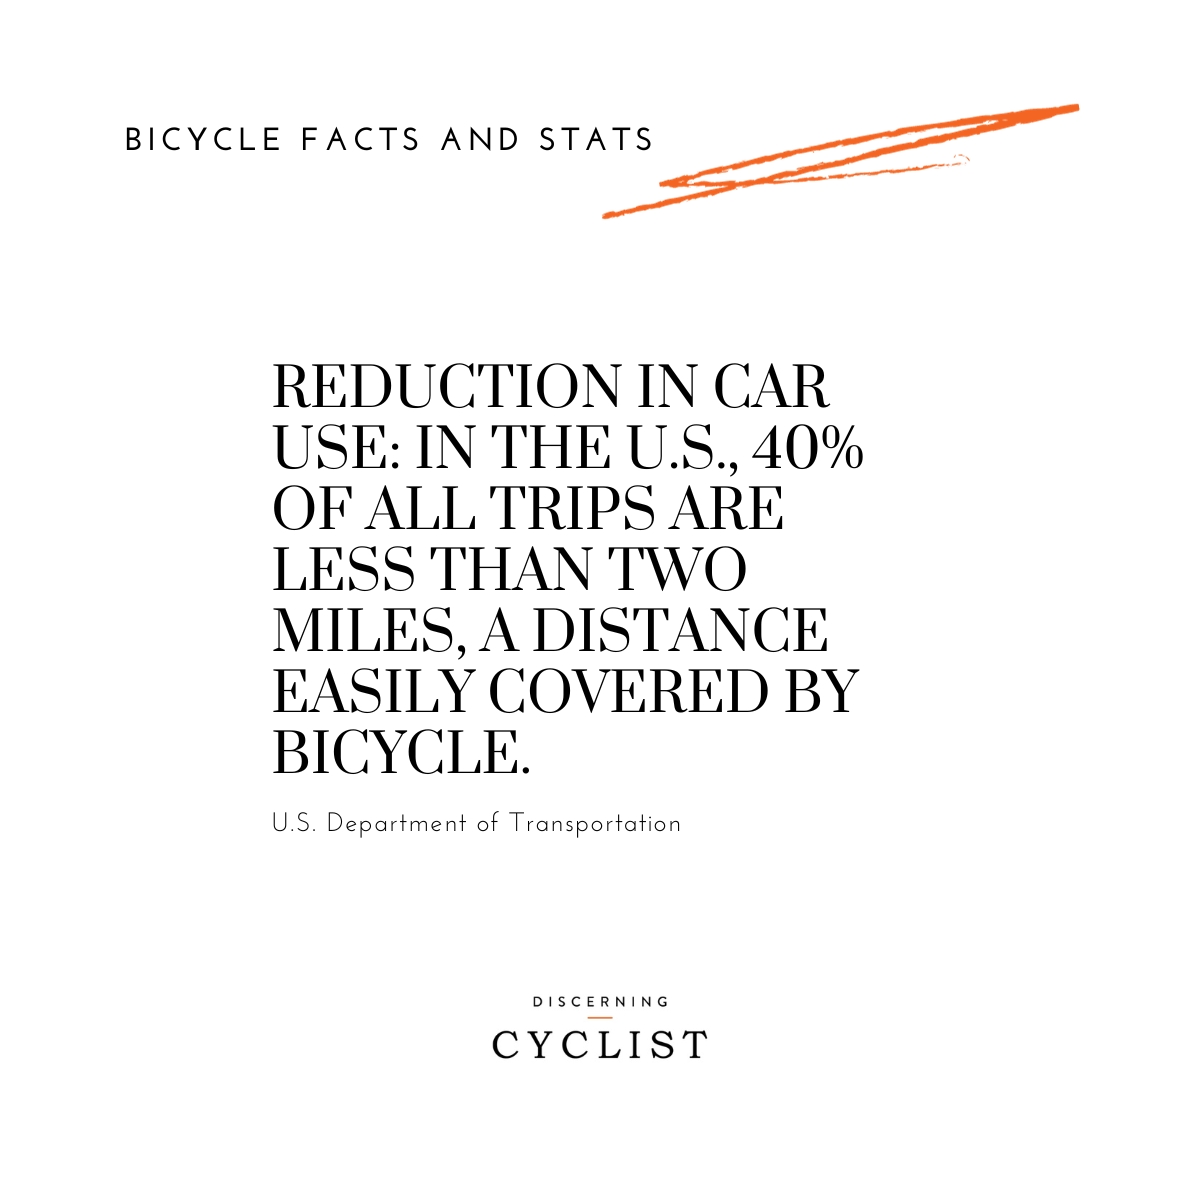 Reduction in Car Use: In the U.S., 40% of all trips are less than two miles, a distance easily covered by bicycle.